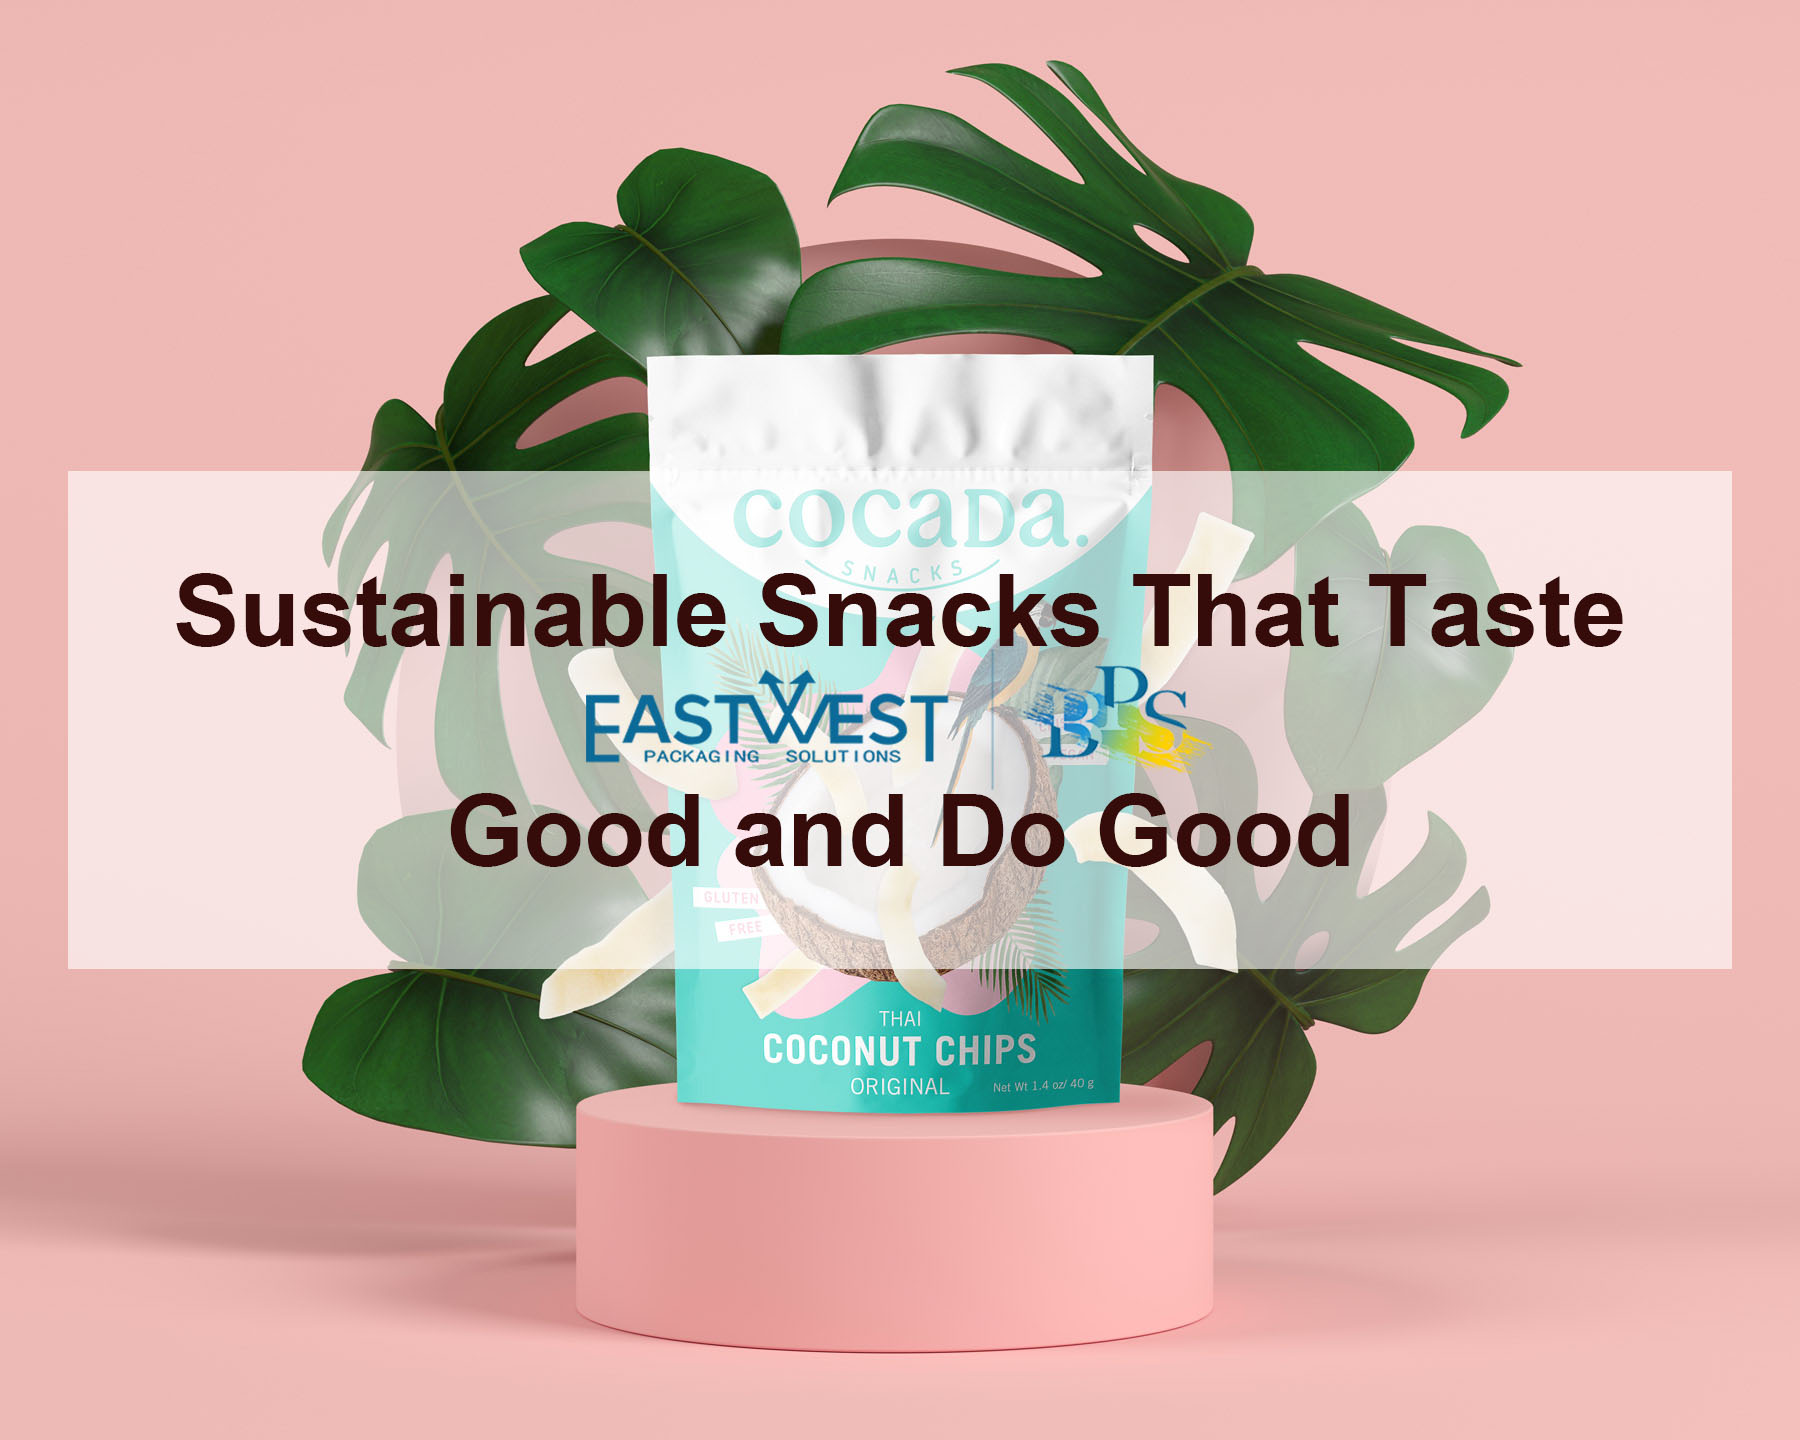 How to Make Sustainable Snacks That Taste Good and Do Good